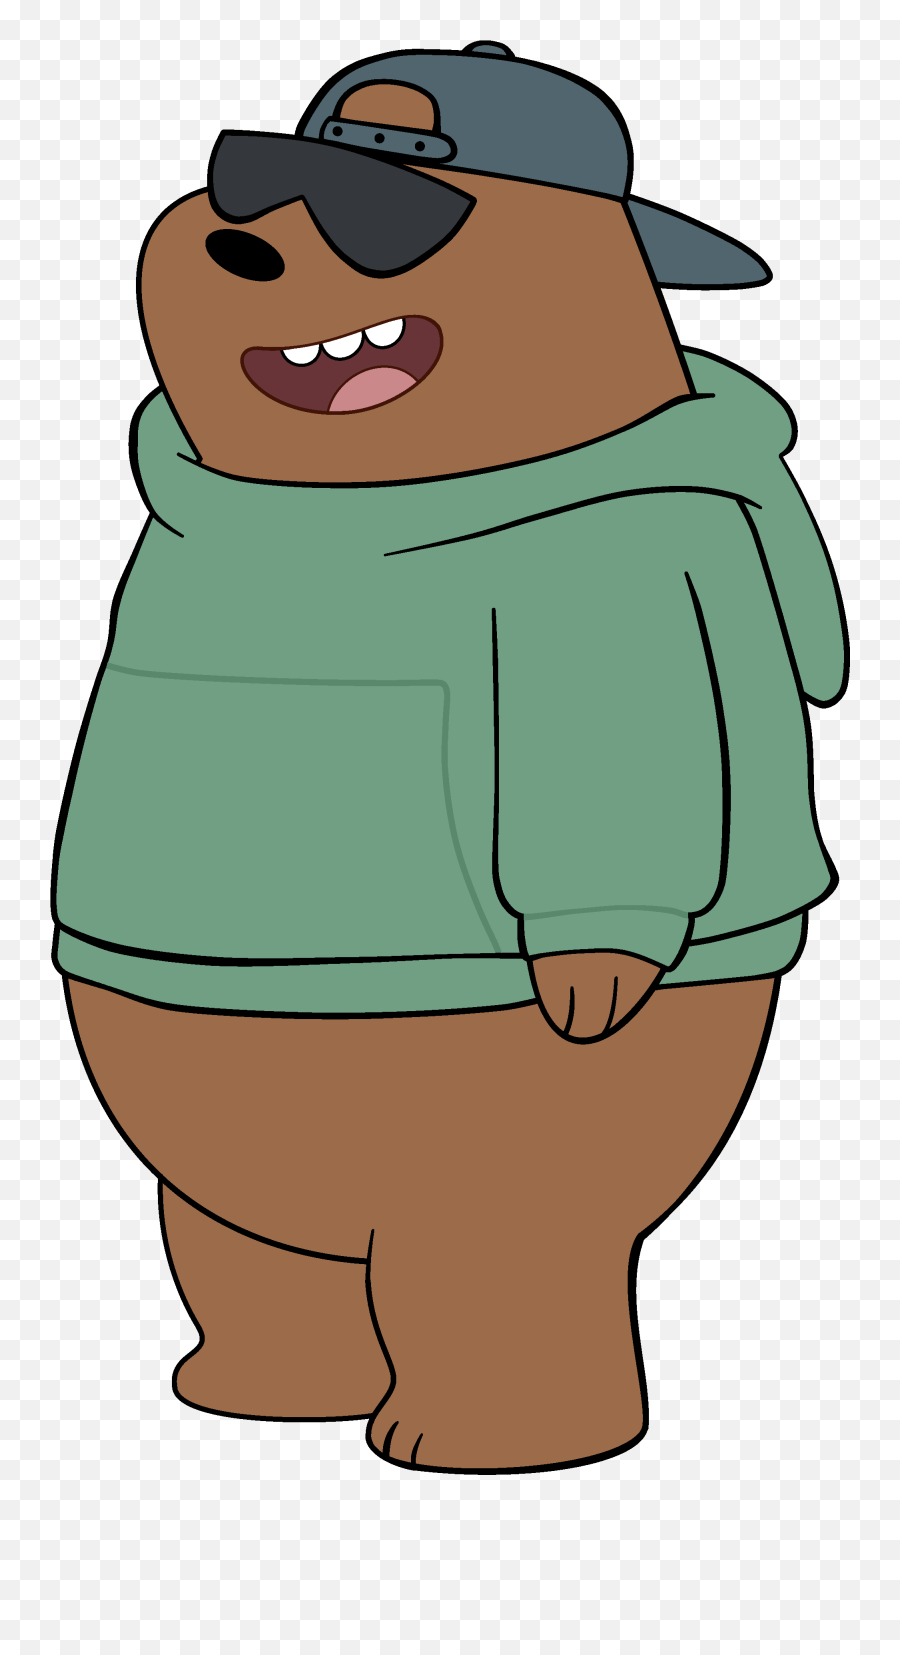 Grizz We Bare Bears - Google Search Grizz We Bare Bears Grizzly Emoji,Hippo Emoji Android